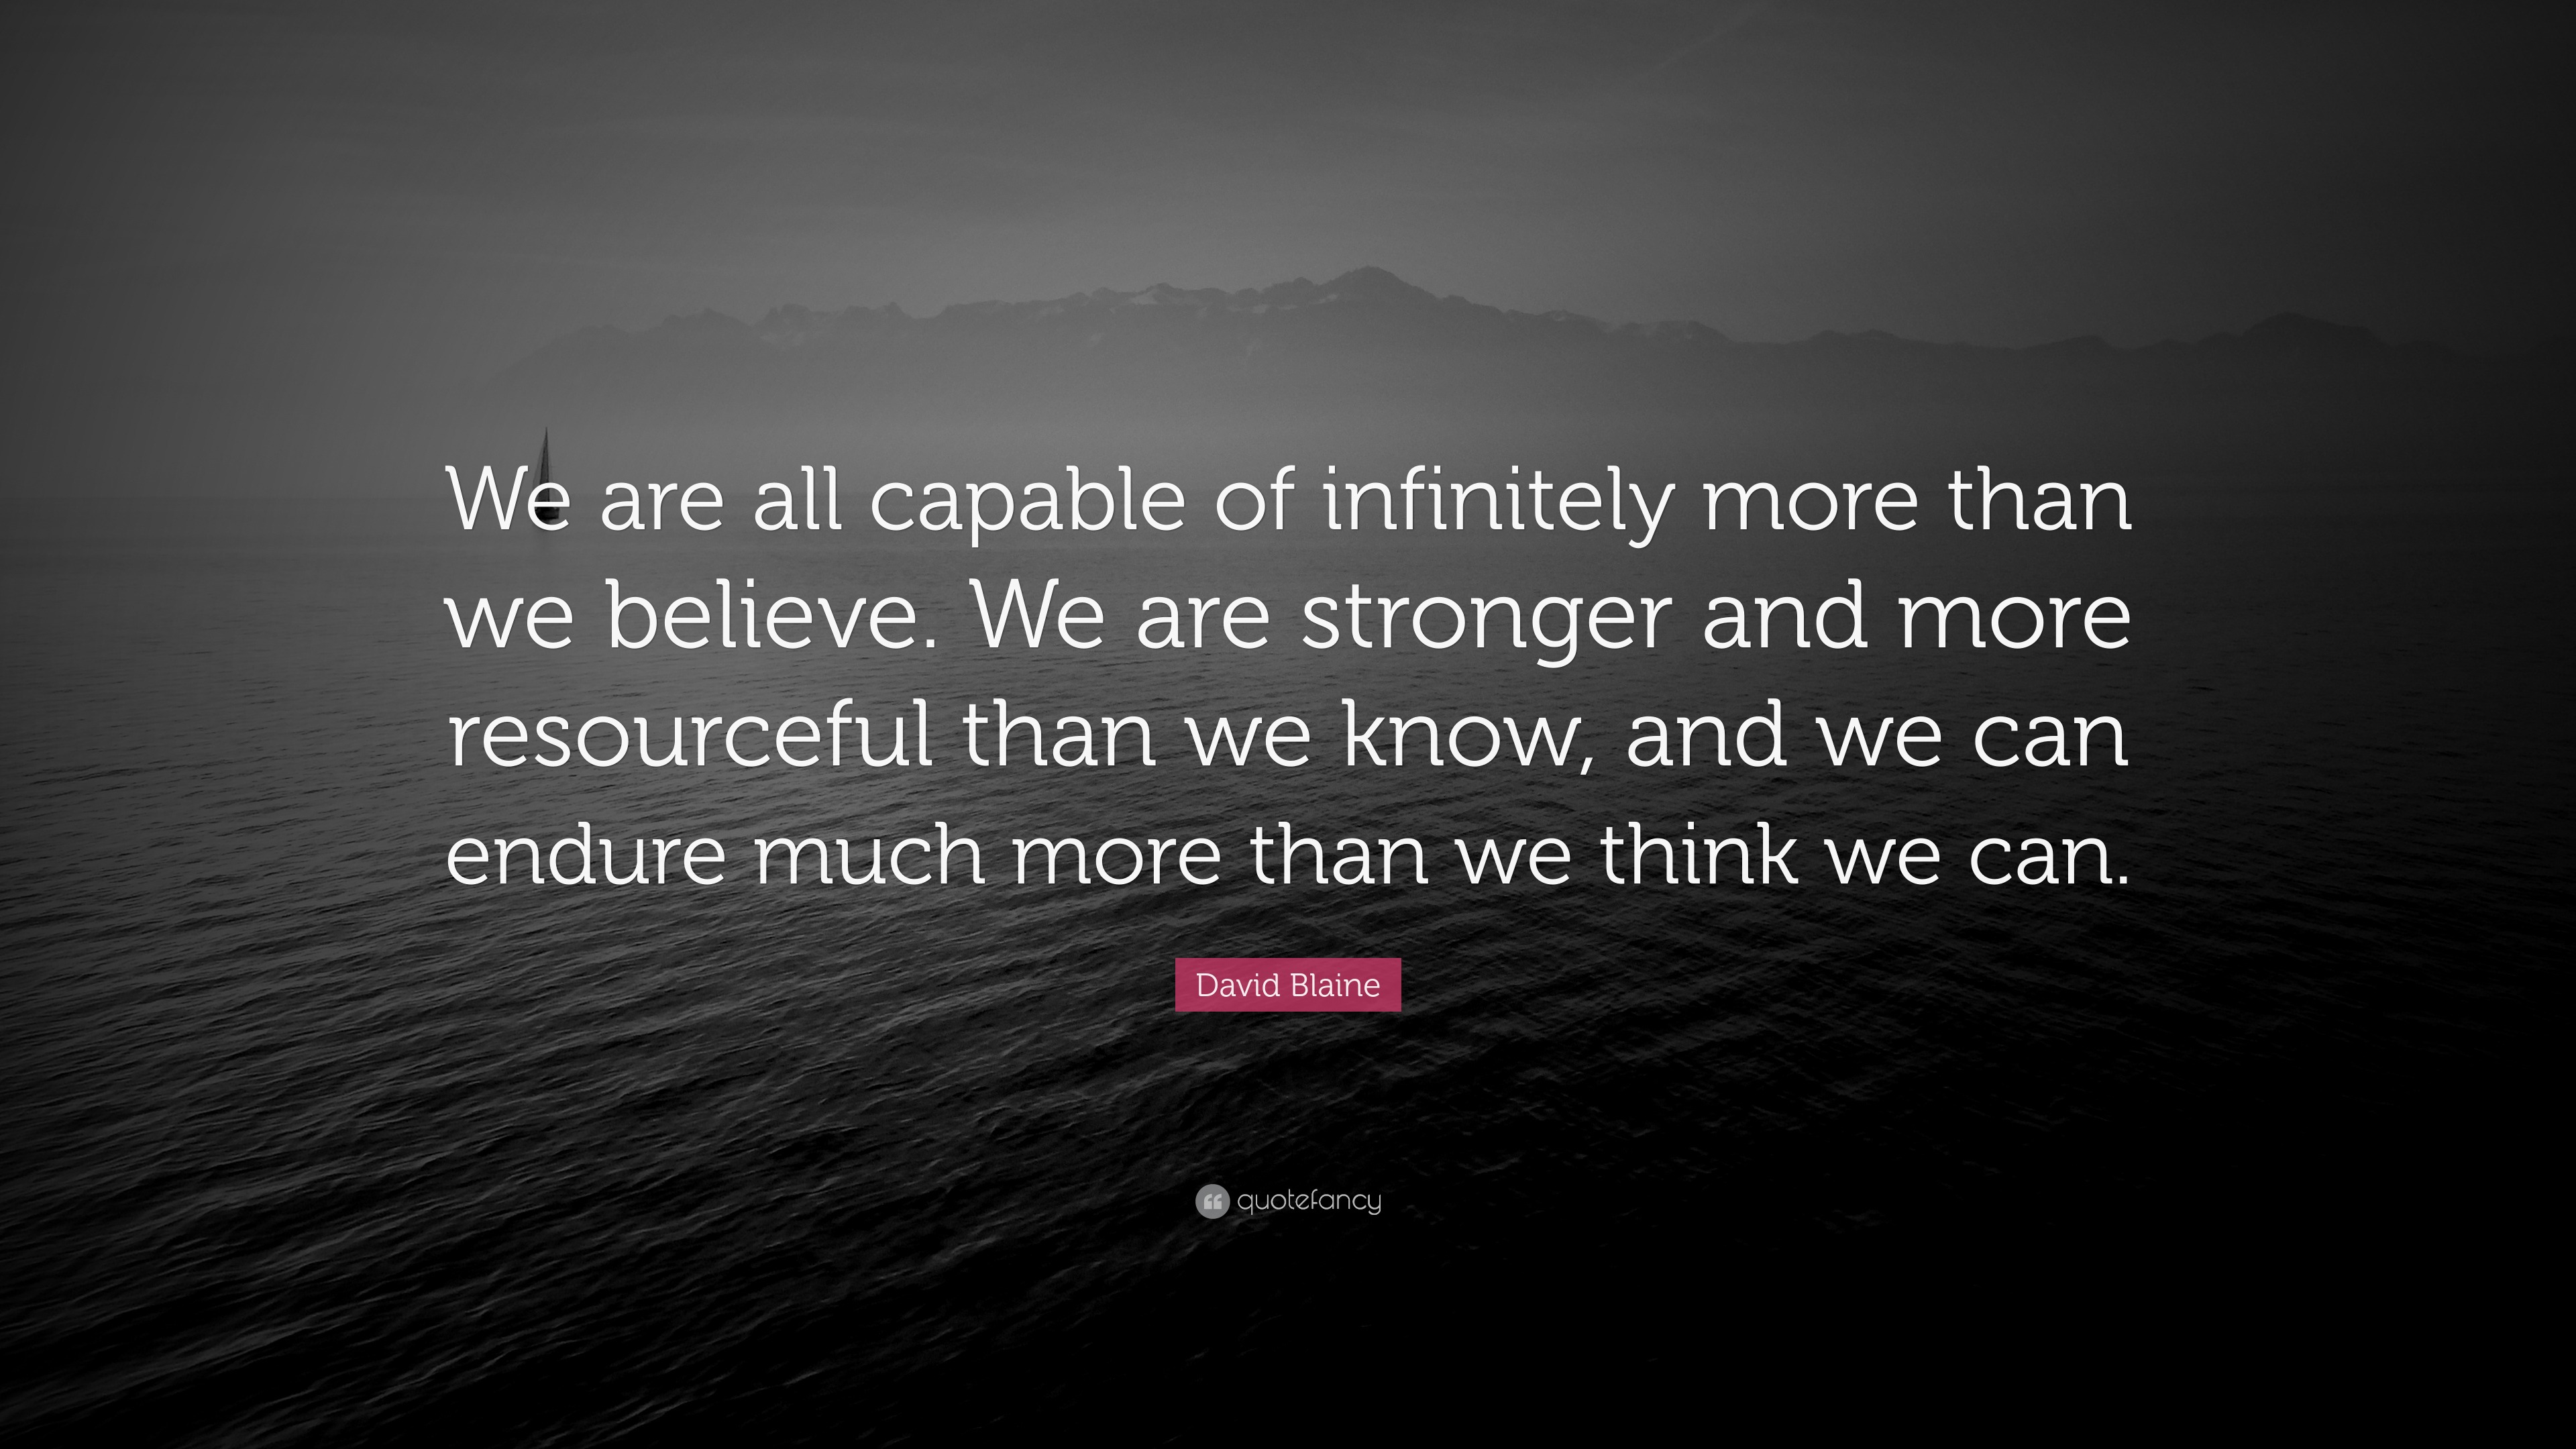 David Blaine Quote: “We are all capable of infinitely more than we ...